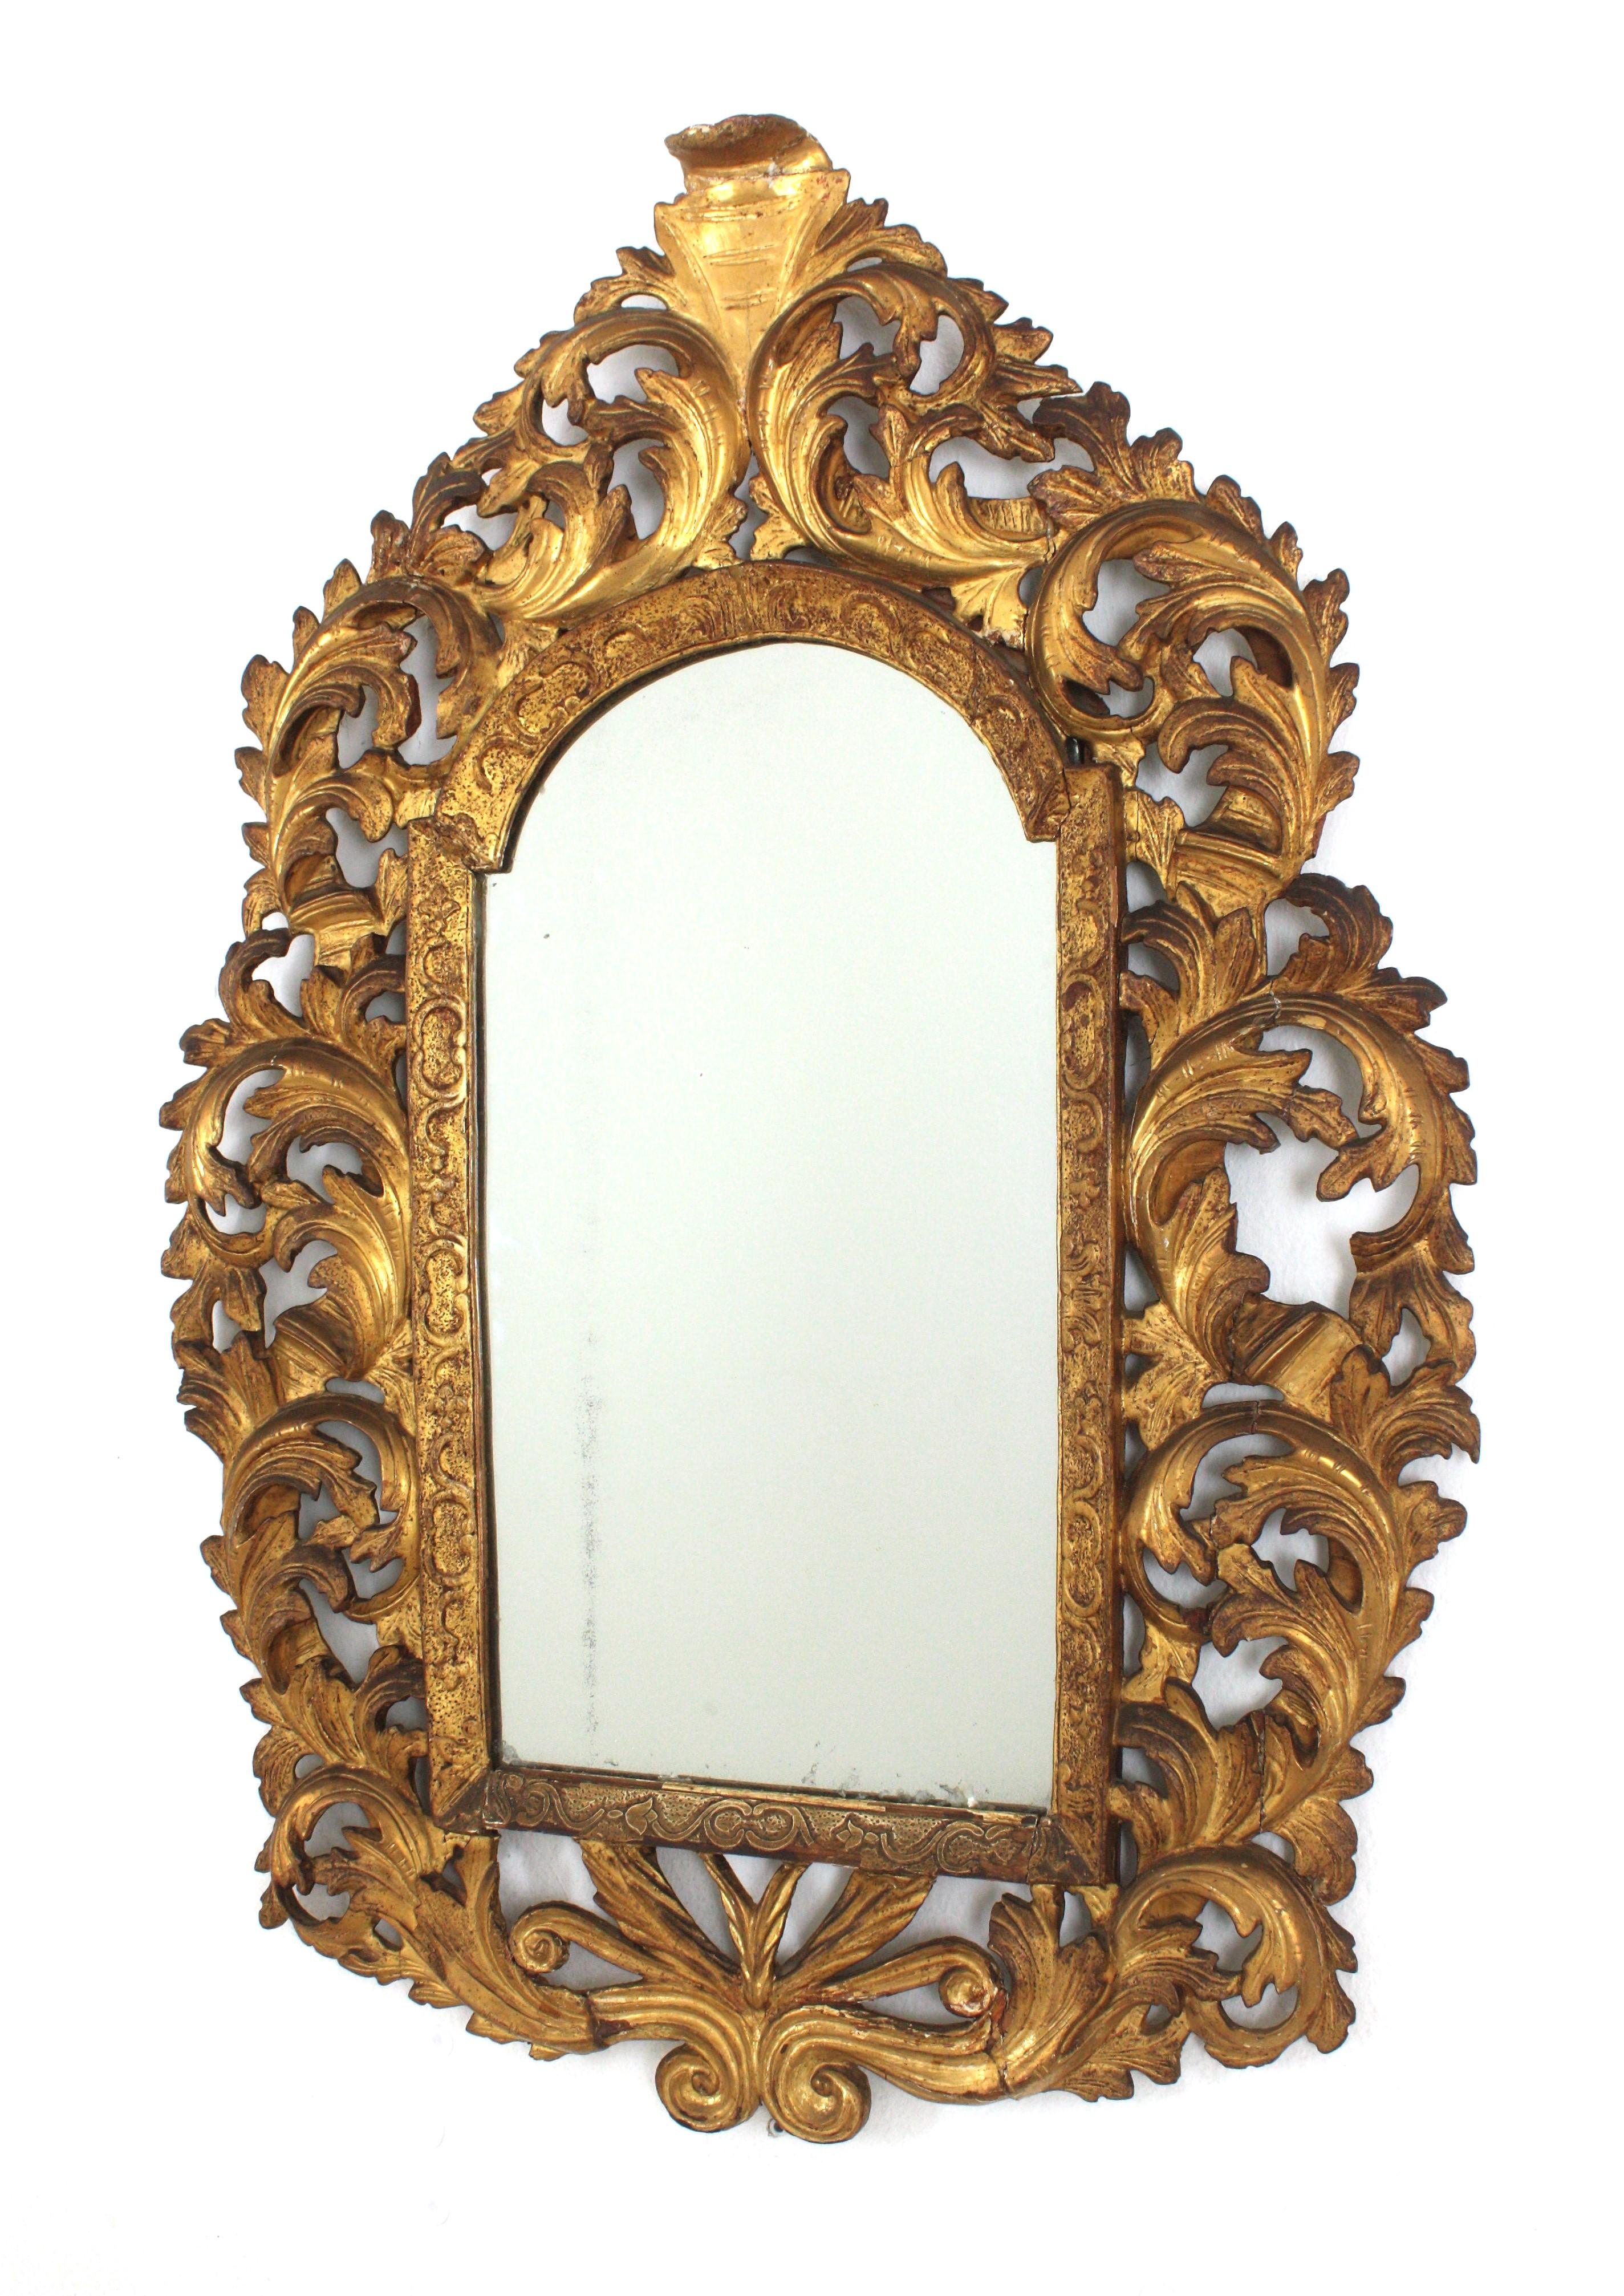 Florentine Giltwood Mirror with Foliage Frame and Arched Top For Sale 2